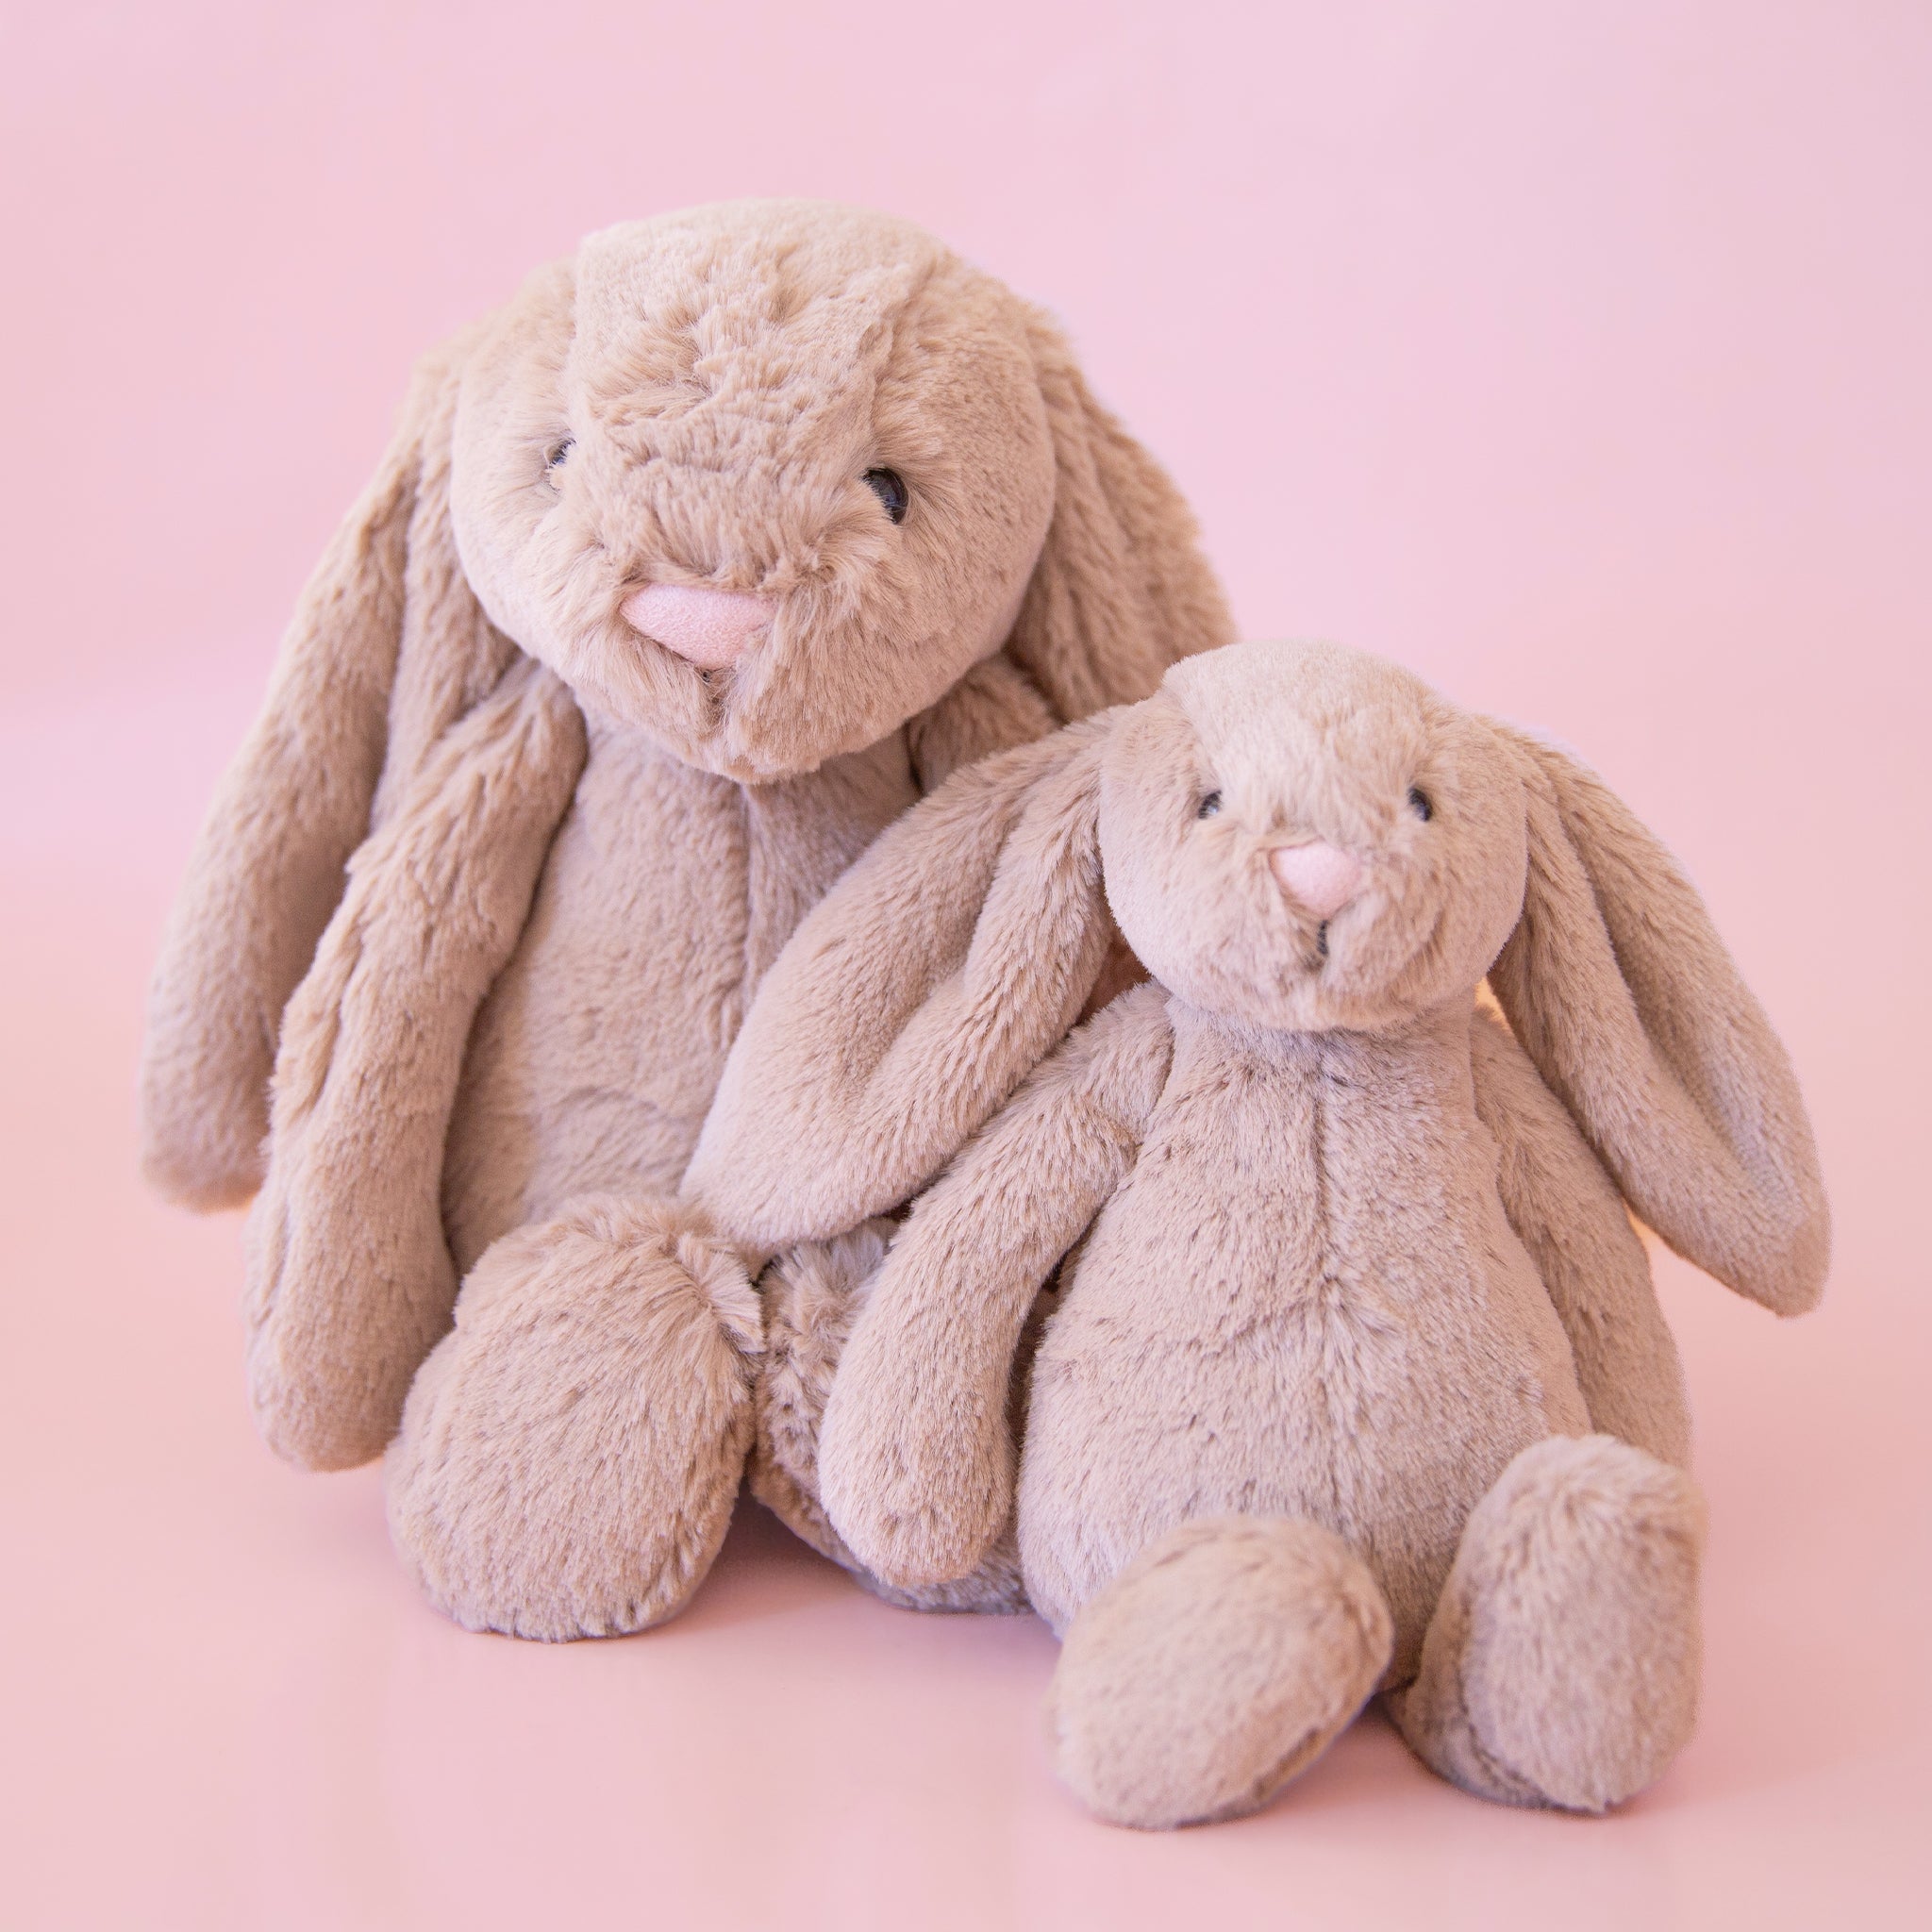 Two, one small and one large, stuffed animals in the shape of beige-grey colored rabbits, with long floppy ears, arms and legs.